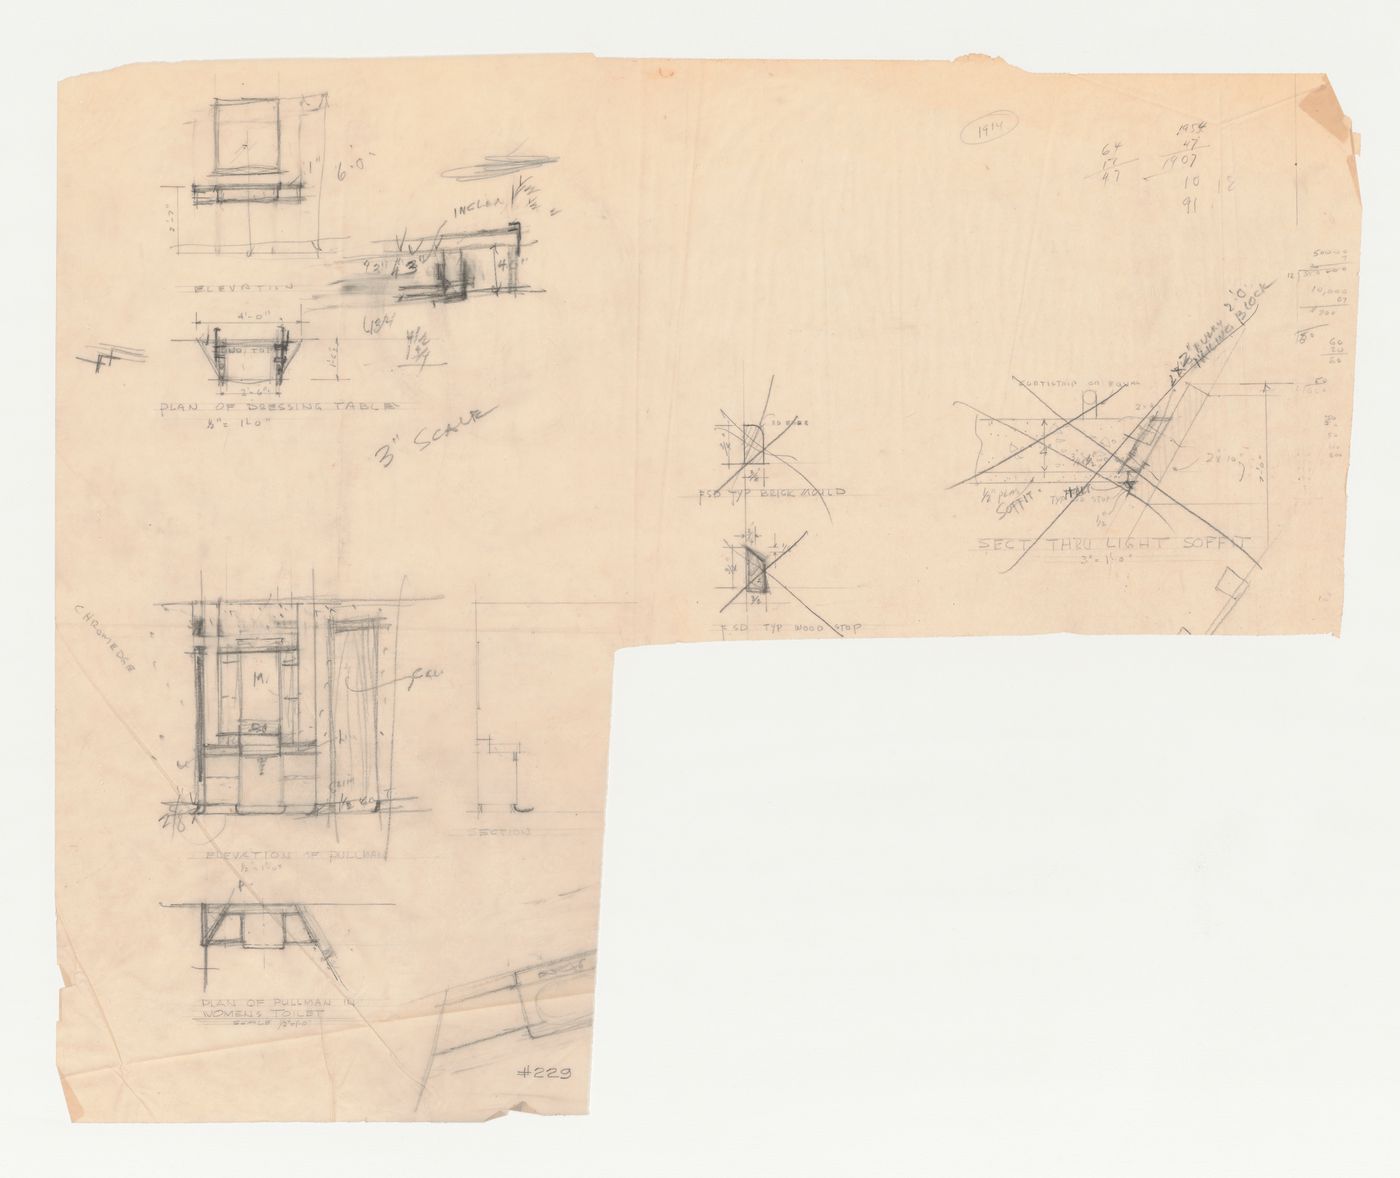 Wayfarers' Chapel, Palos Verdes, California: Sketch sections, plans and elevations for the vestry dressing table and lavatory